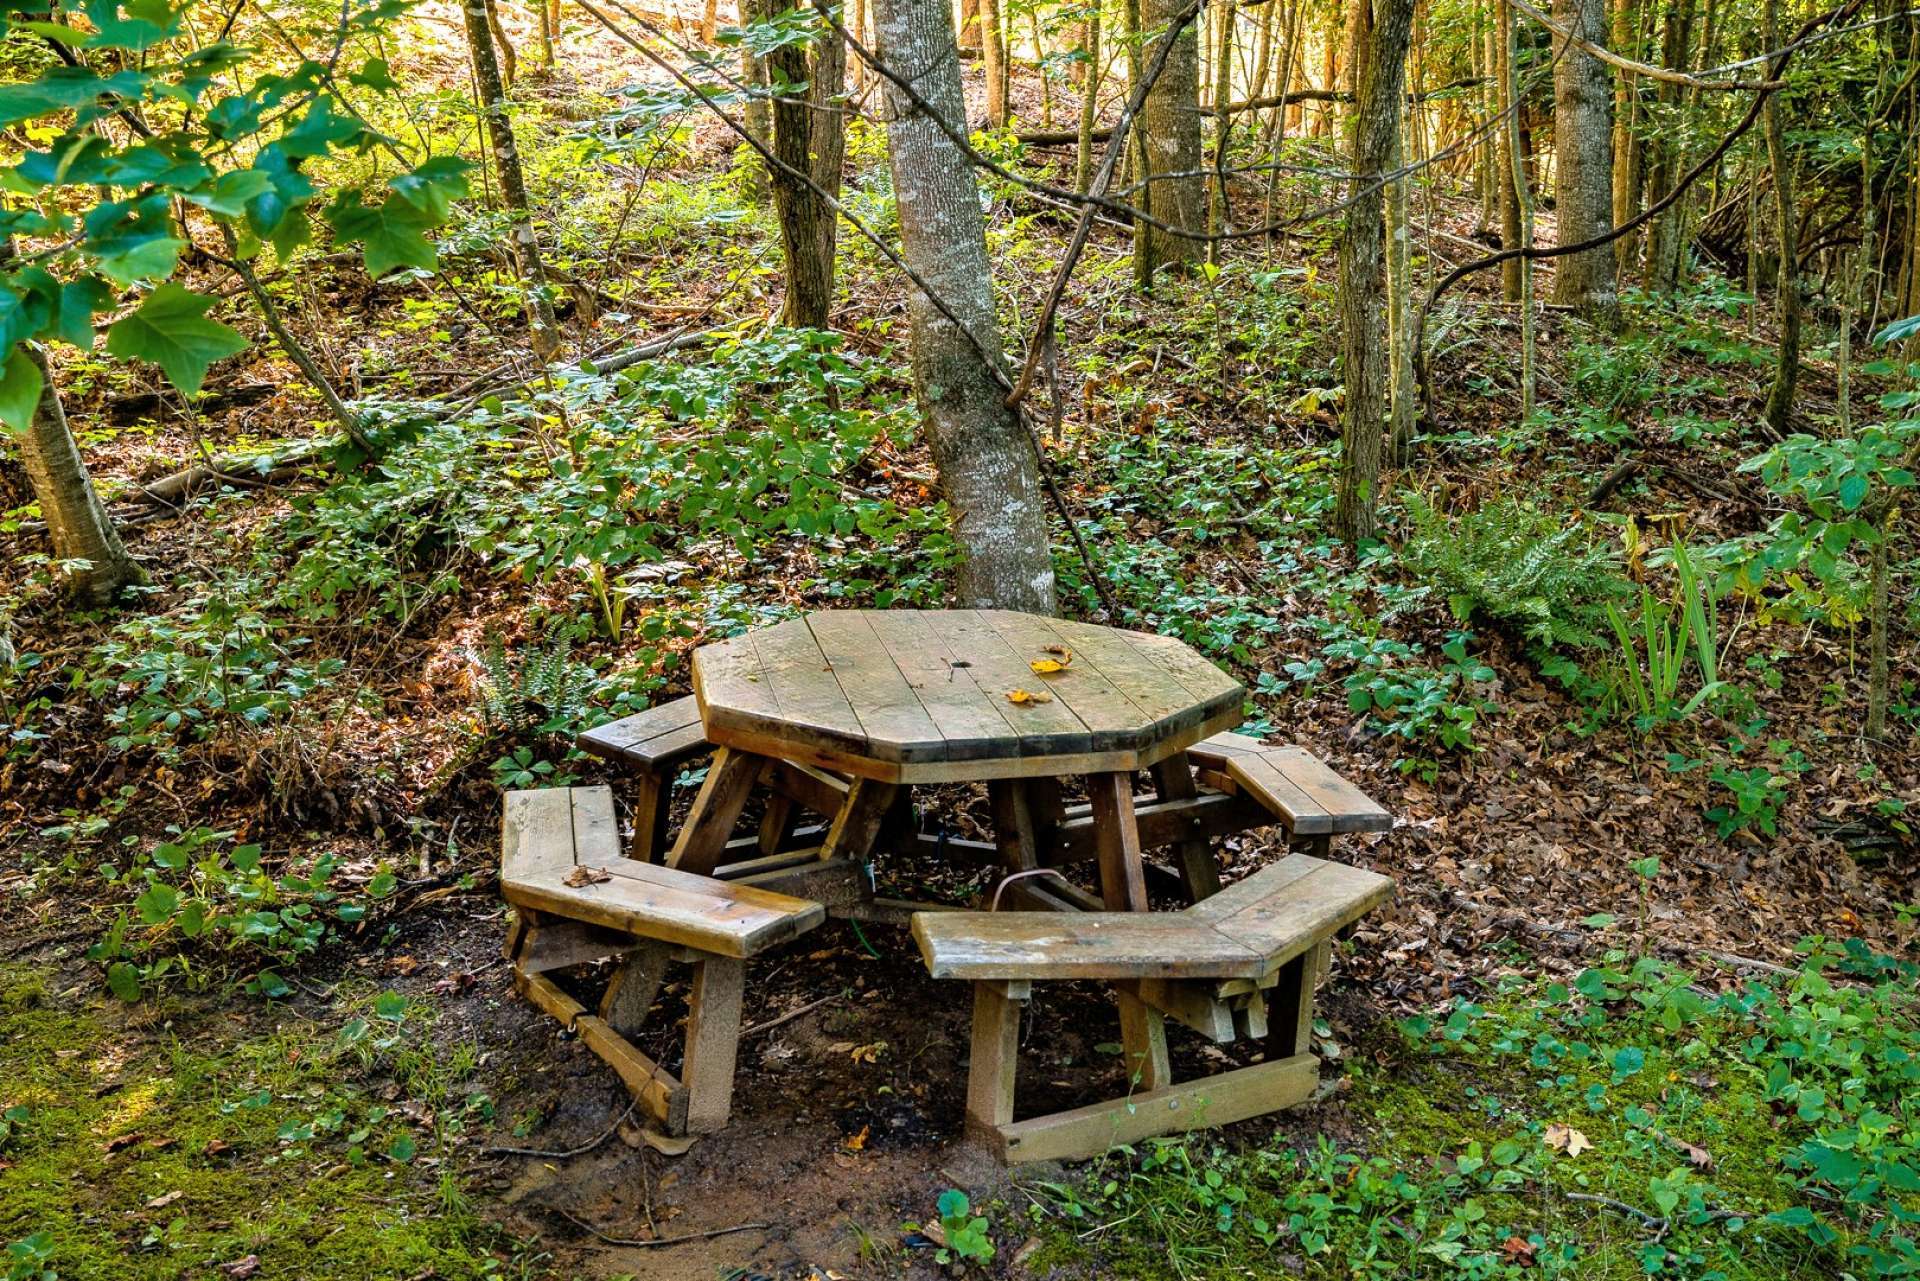 Or, take you lunch outside to dine in the forest setting with the sounds of song birds and the rustling of leaves as chipmunks and squirrels scamper through the woodlands.